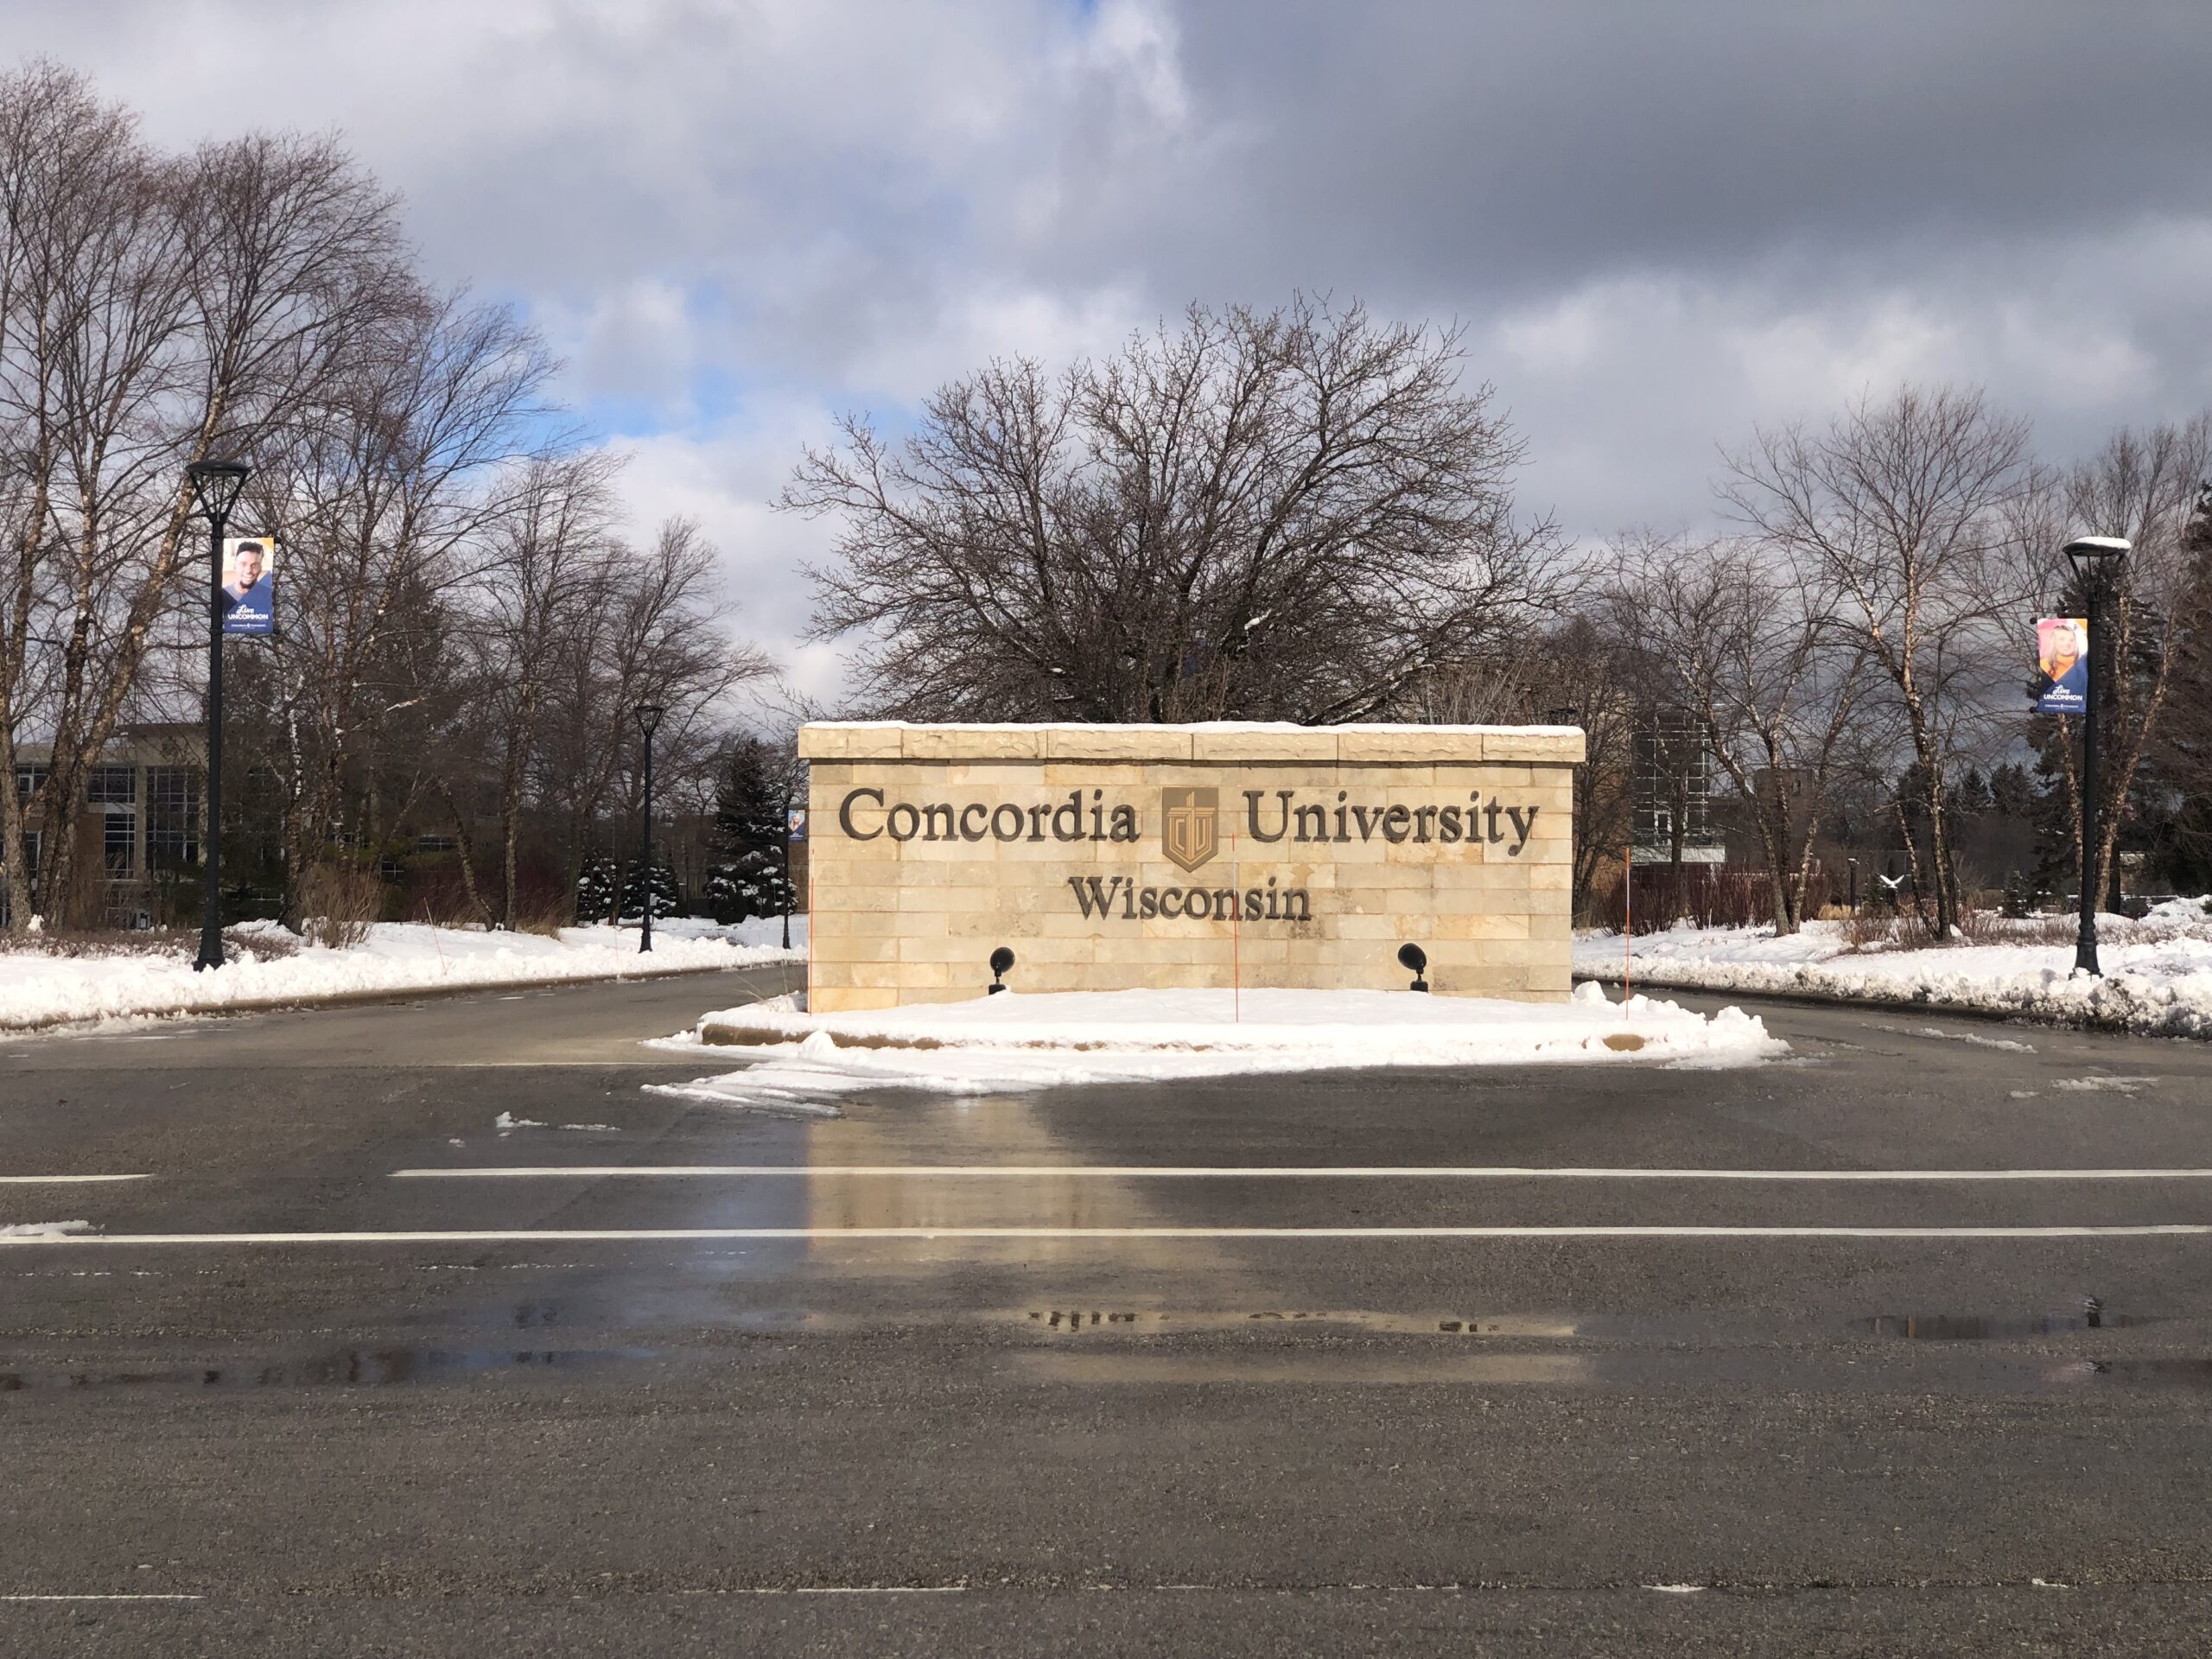 Concordia University latest to announce cuts amid fiscal challenges